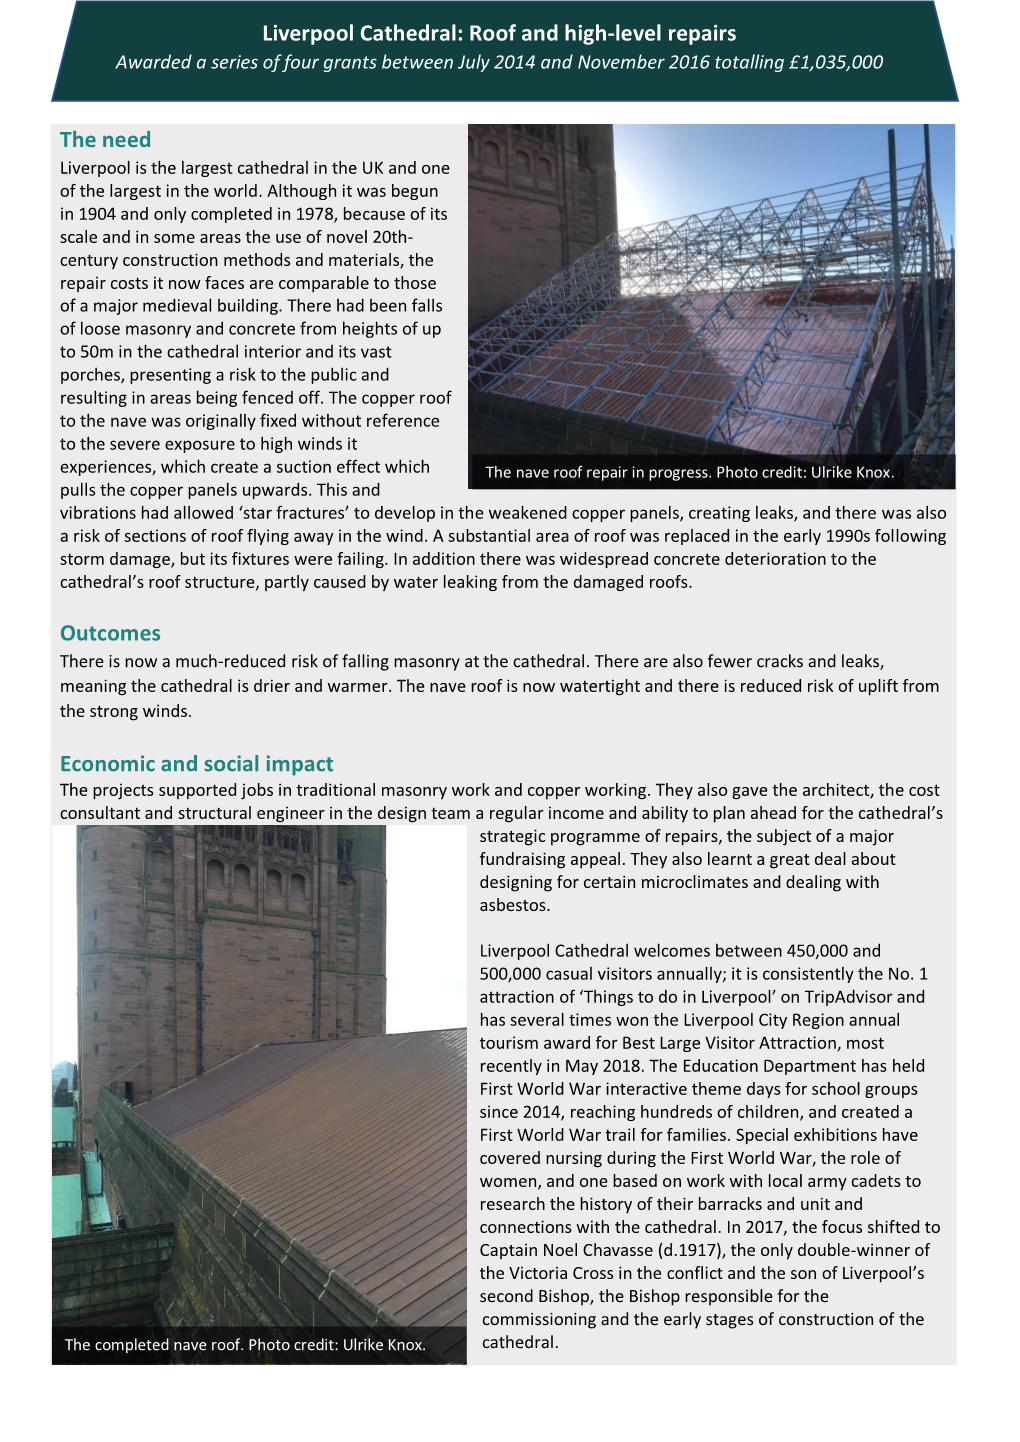 Liverpool Cathedral: Roof and High-Level Repairs Awarded a Series of Four Grants Between July 2014 and November 2016 Totalling £1,035,000